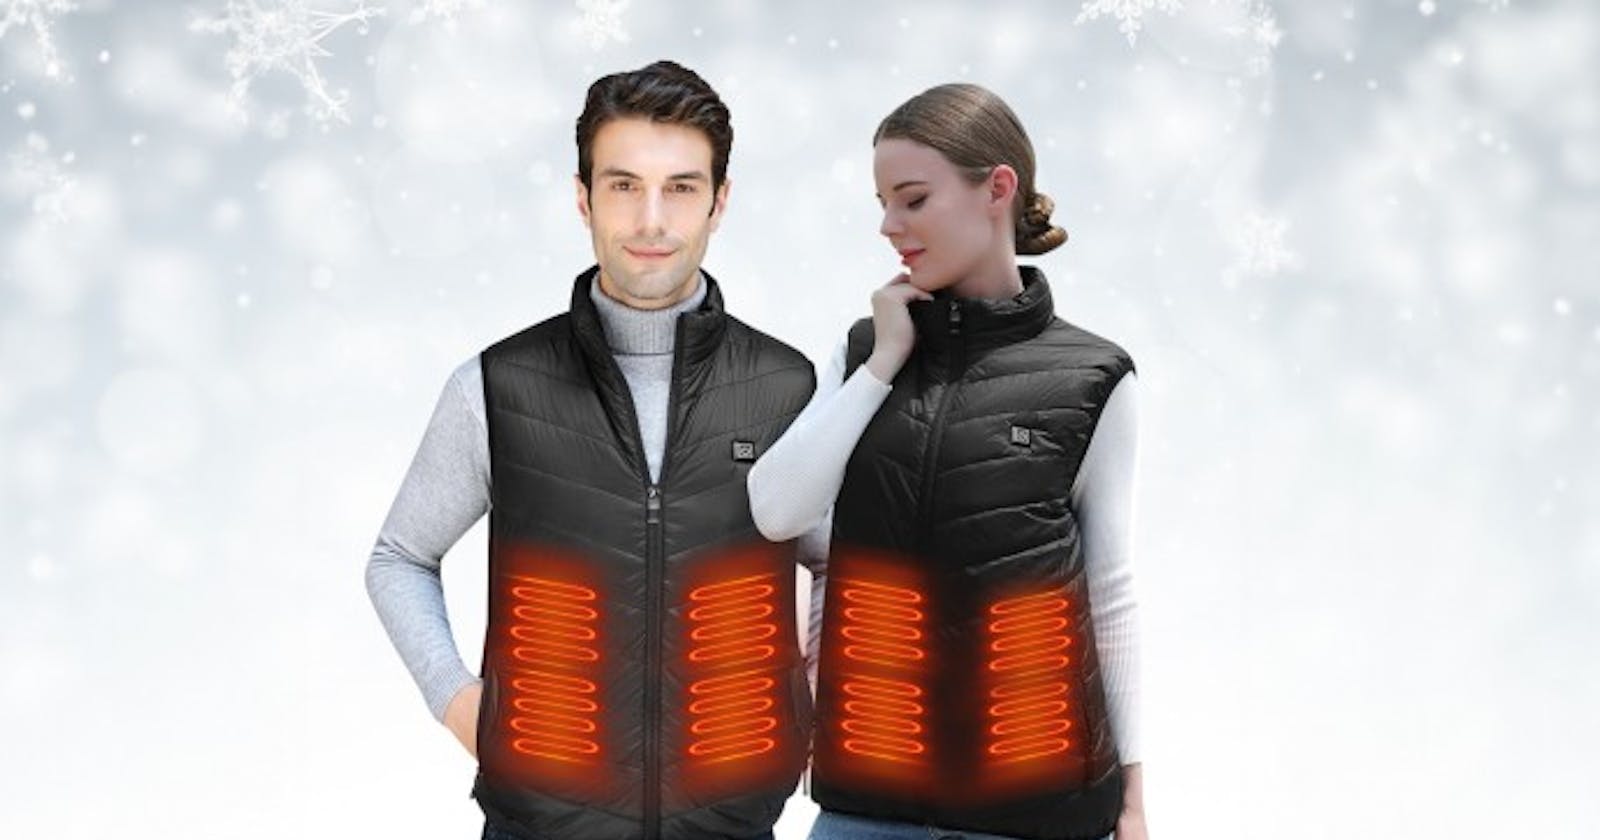 VolteX Heated Vest Reviews – Worth it?